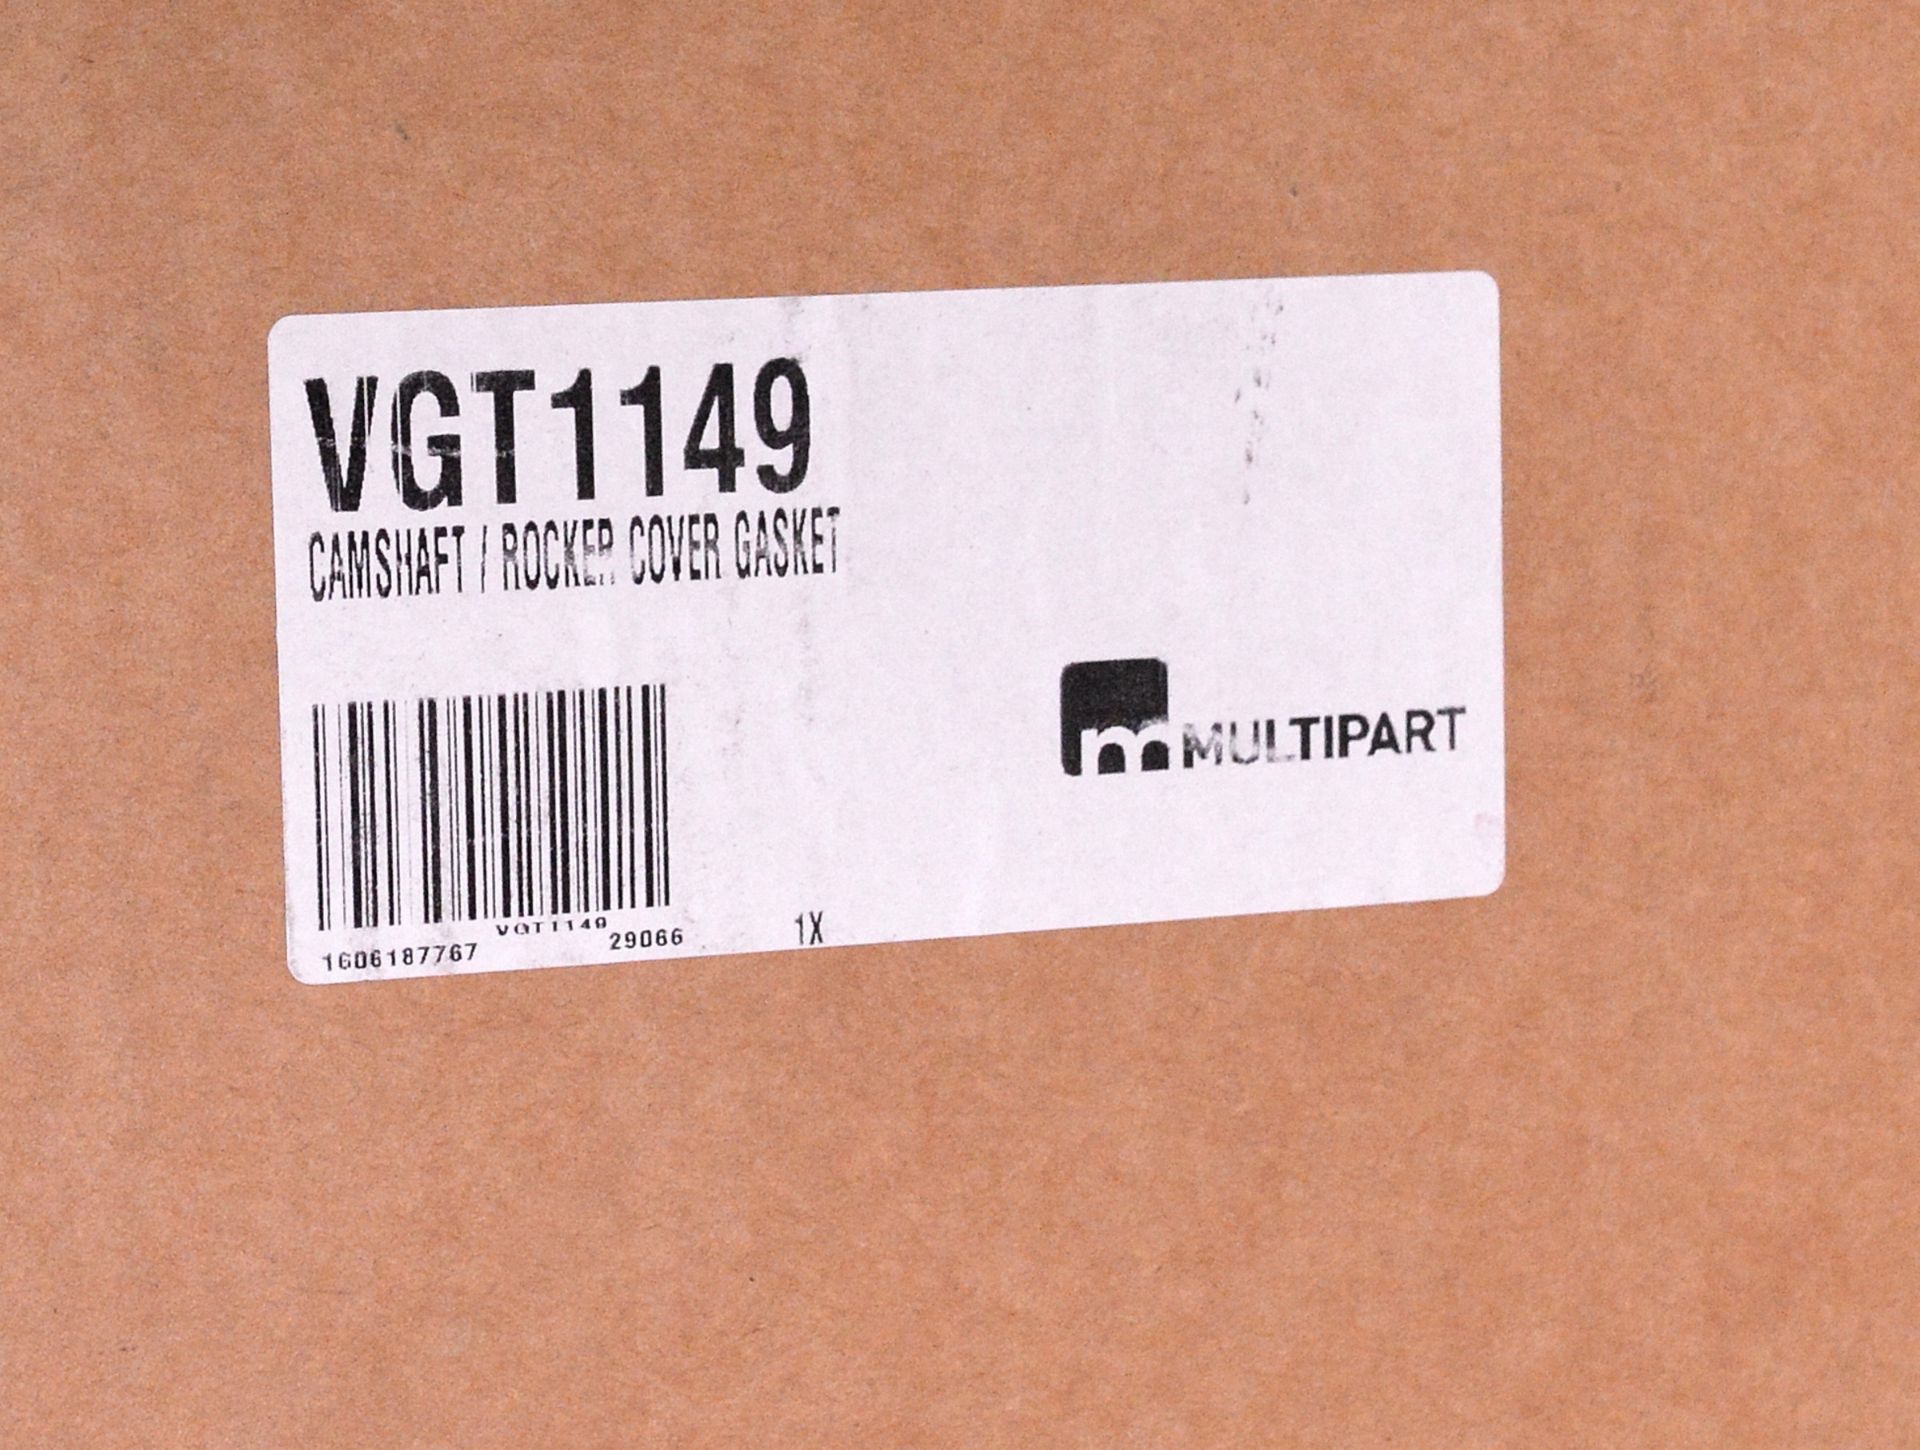 Vehicle parts - brake pad sets, cross joints, tail lamp assemblies, fuel filters and more - Image 11 of 11